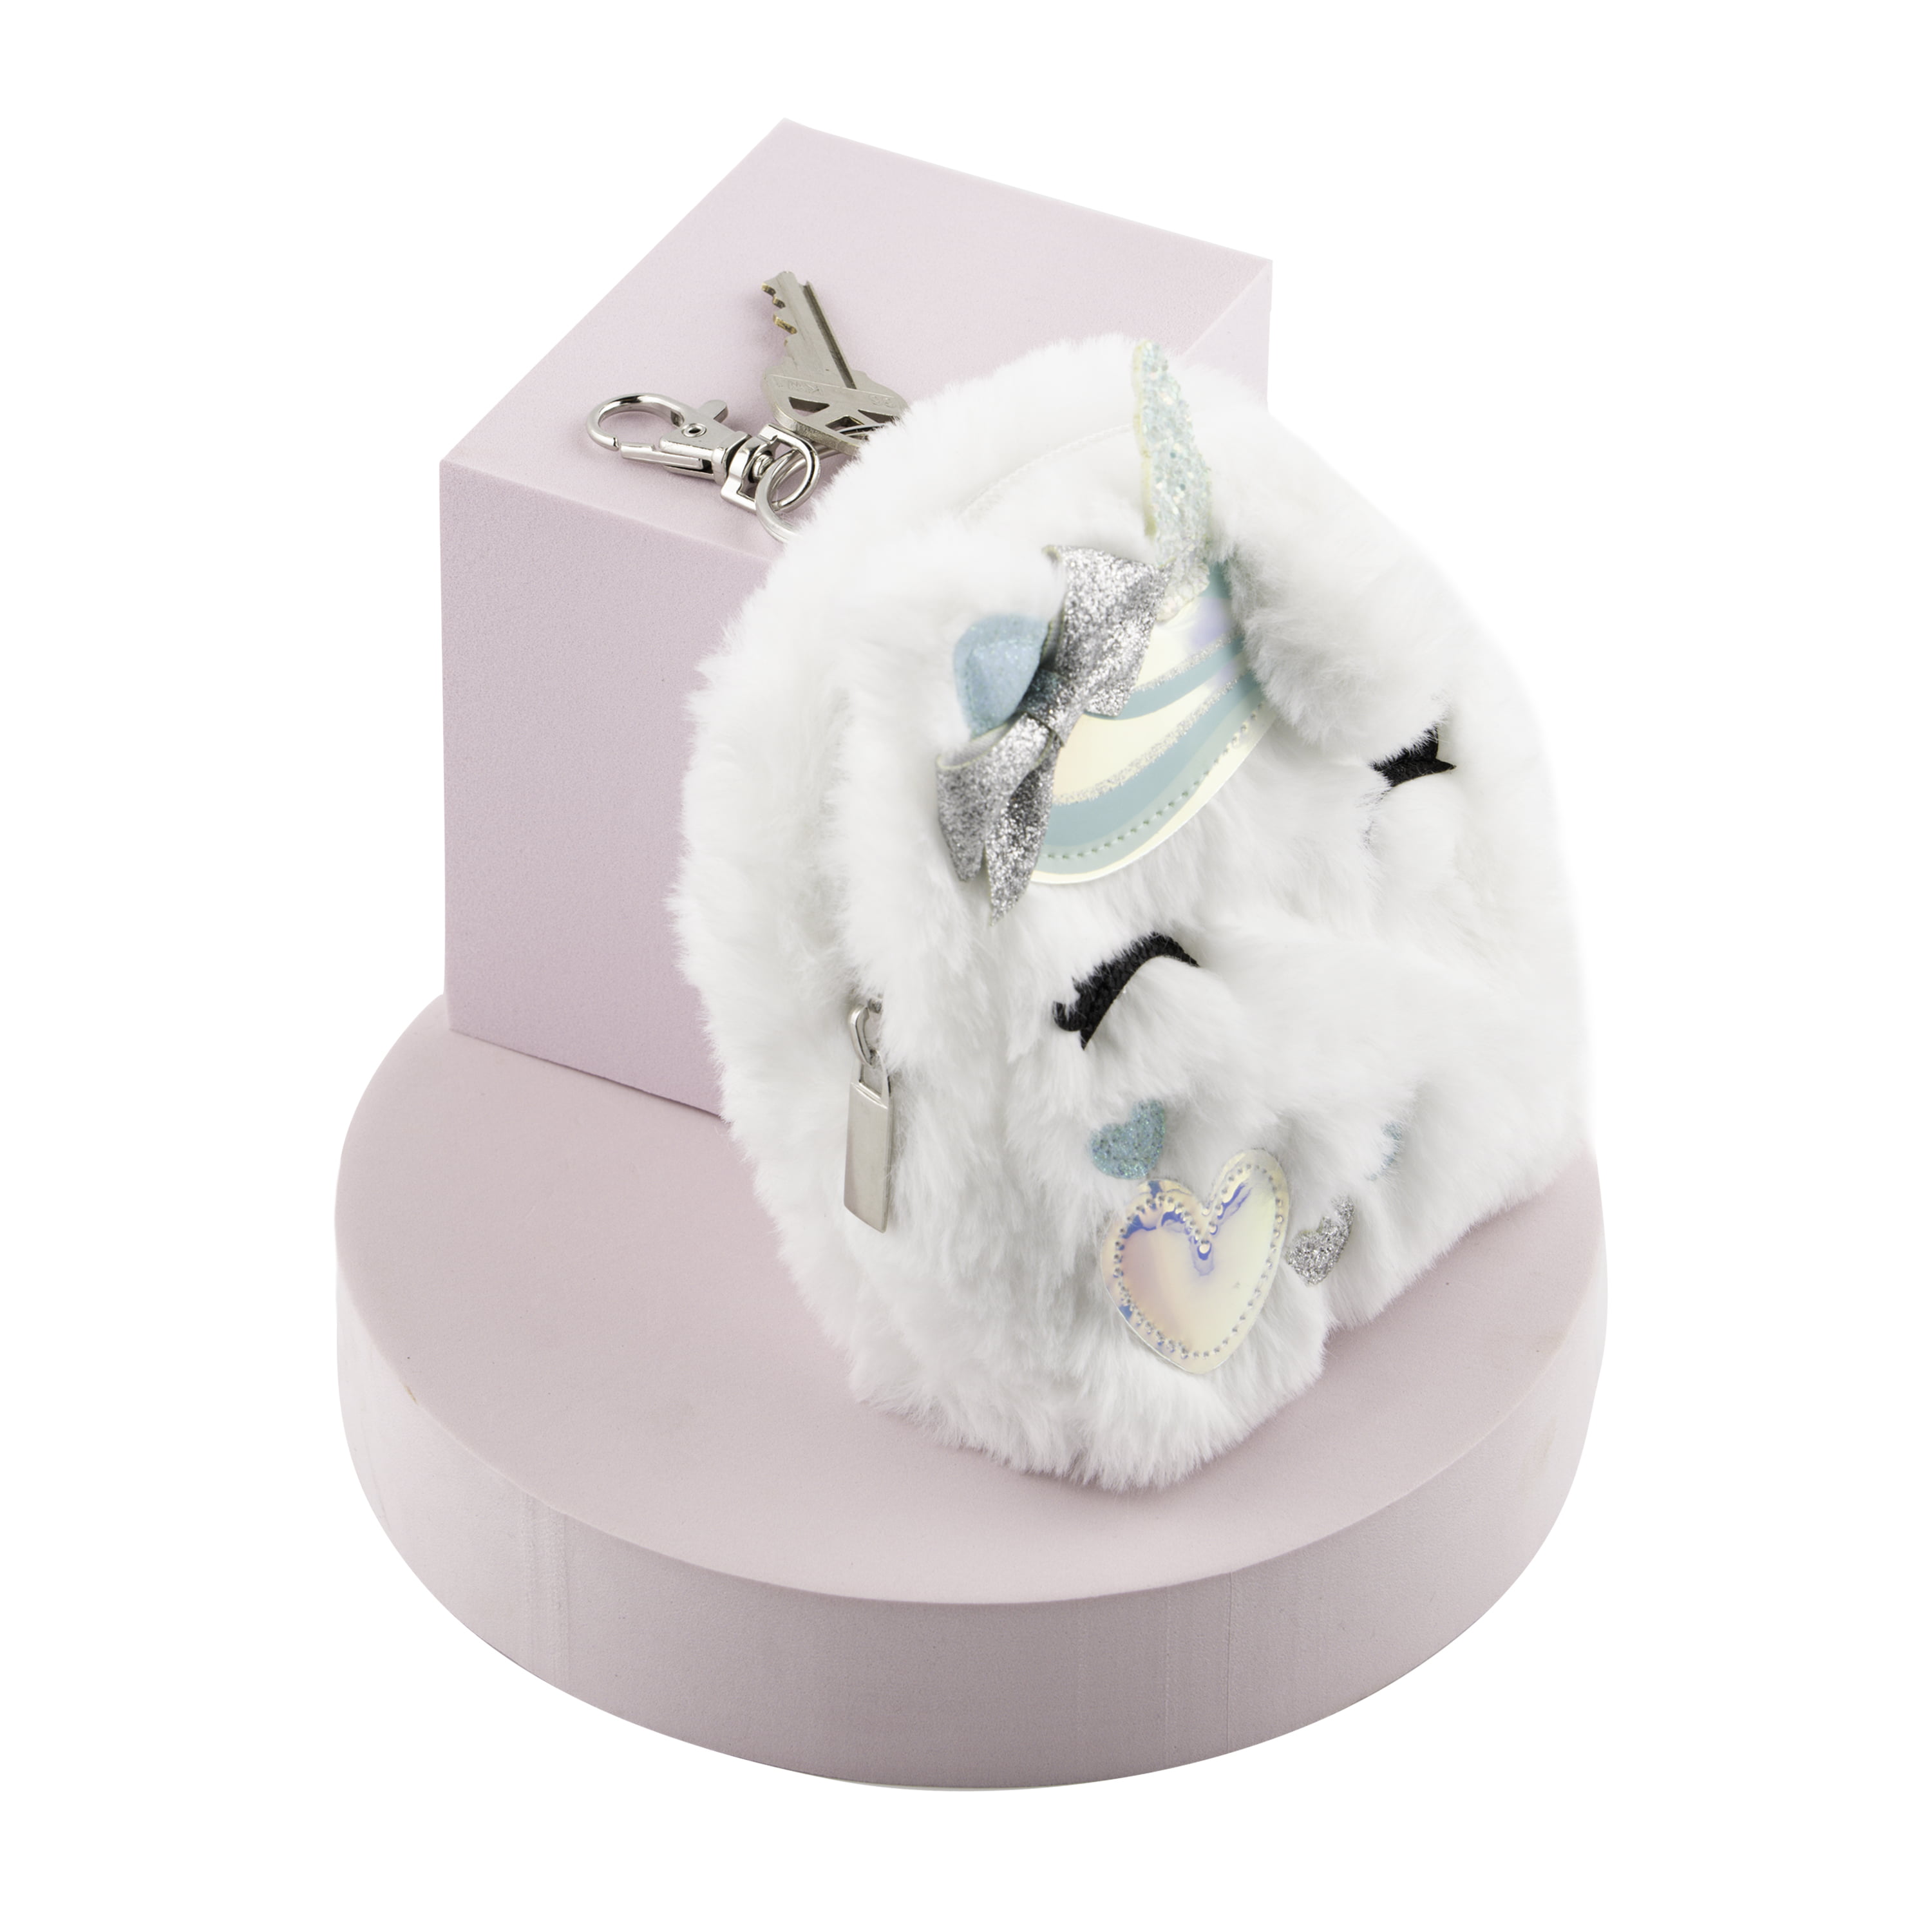 Claire's, Bags, Claires Mini Cotton Candy Backpack Keychains